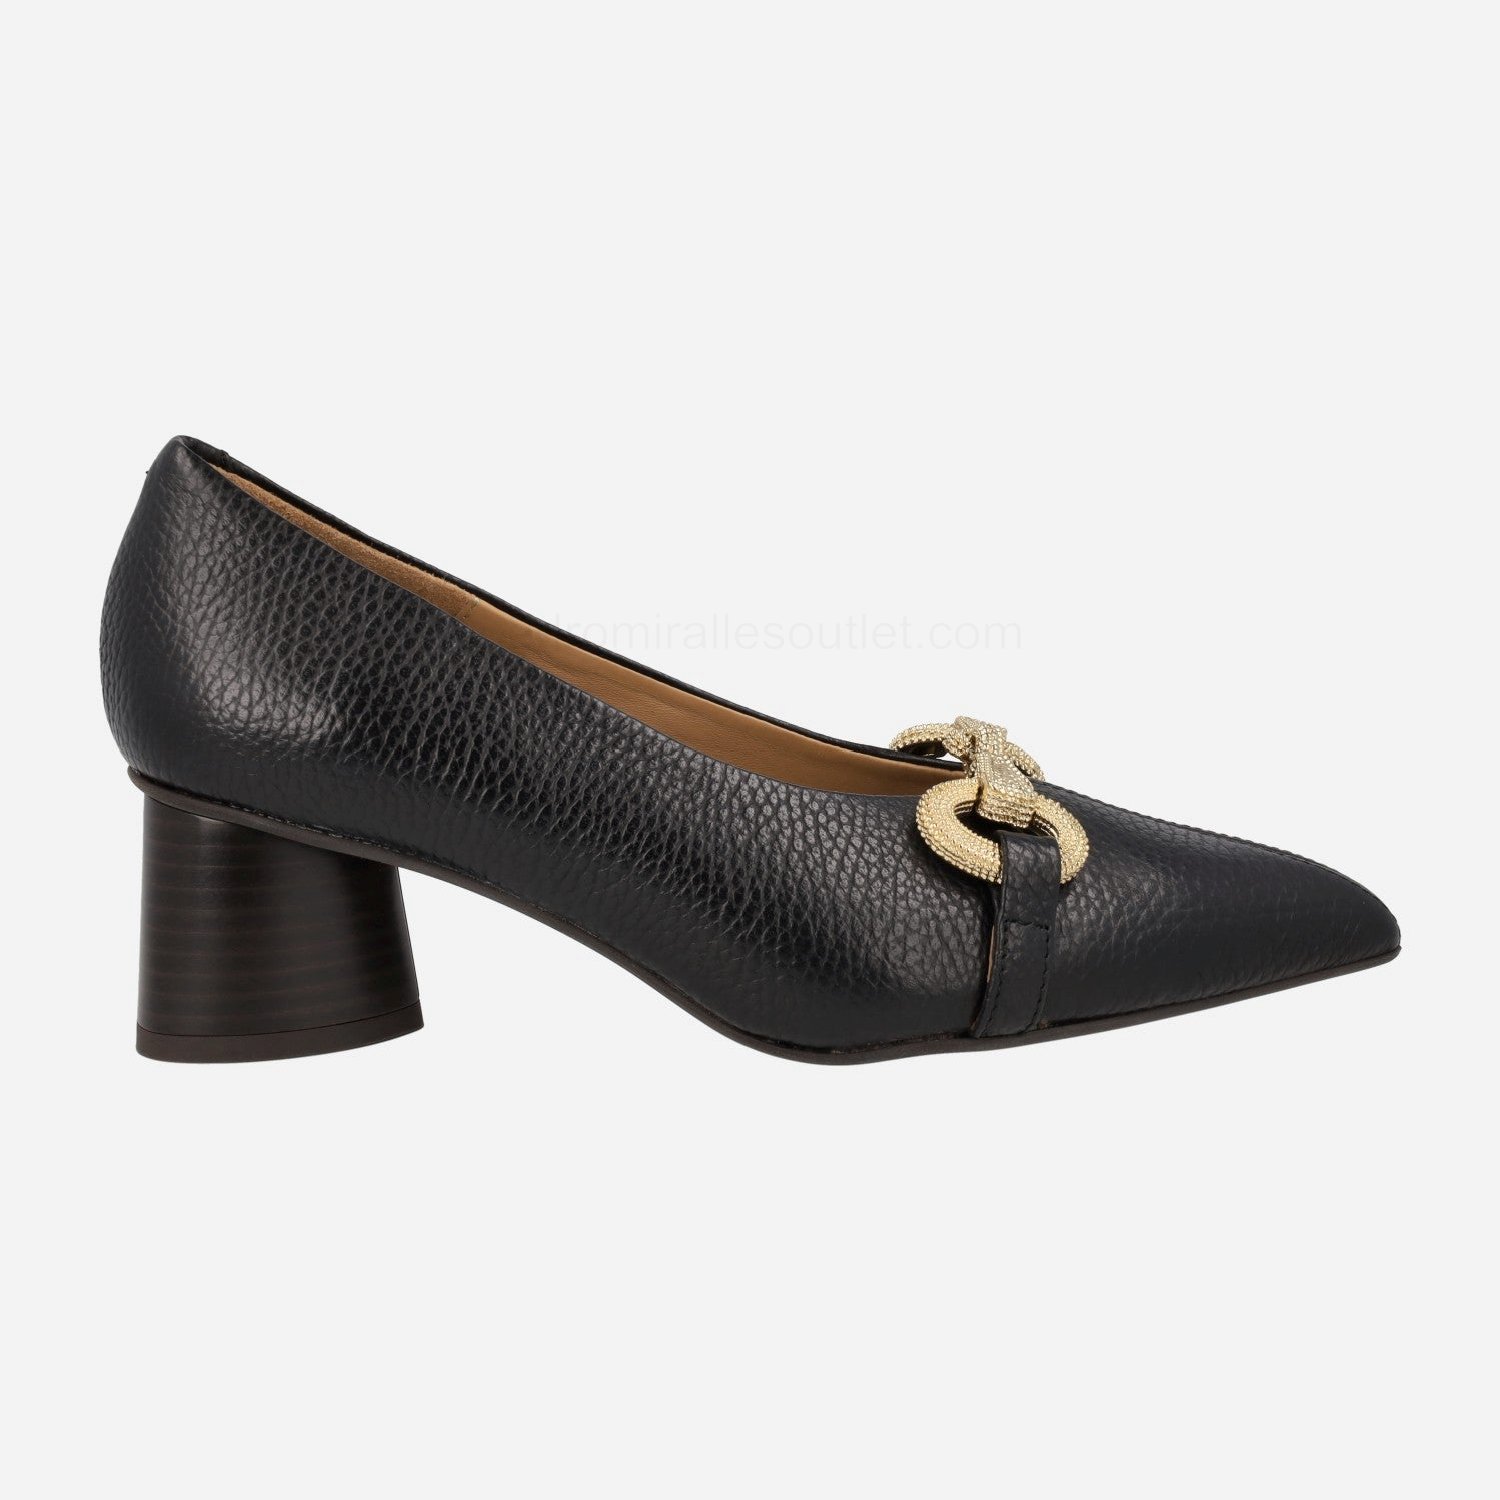 (image for) Garica heeled shoes in black leather with gold decoration | pedro miralles outlet-1804